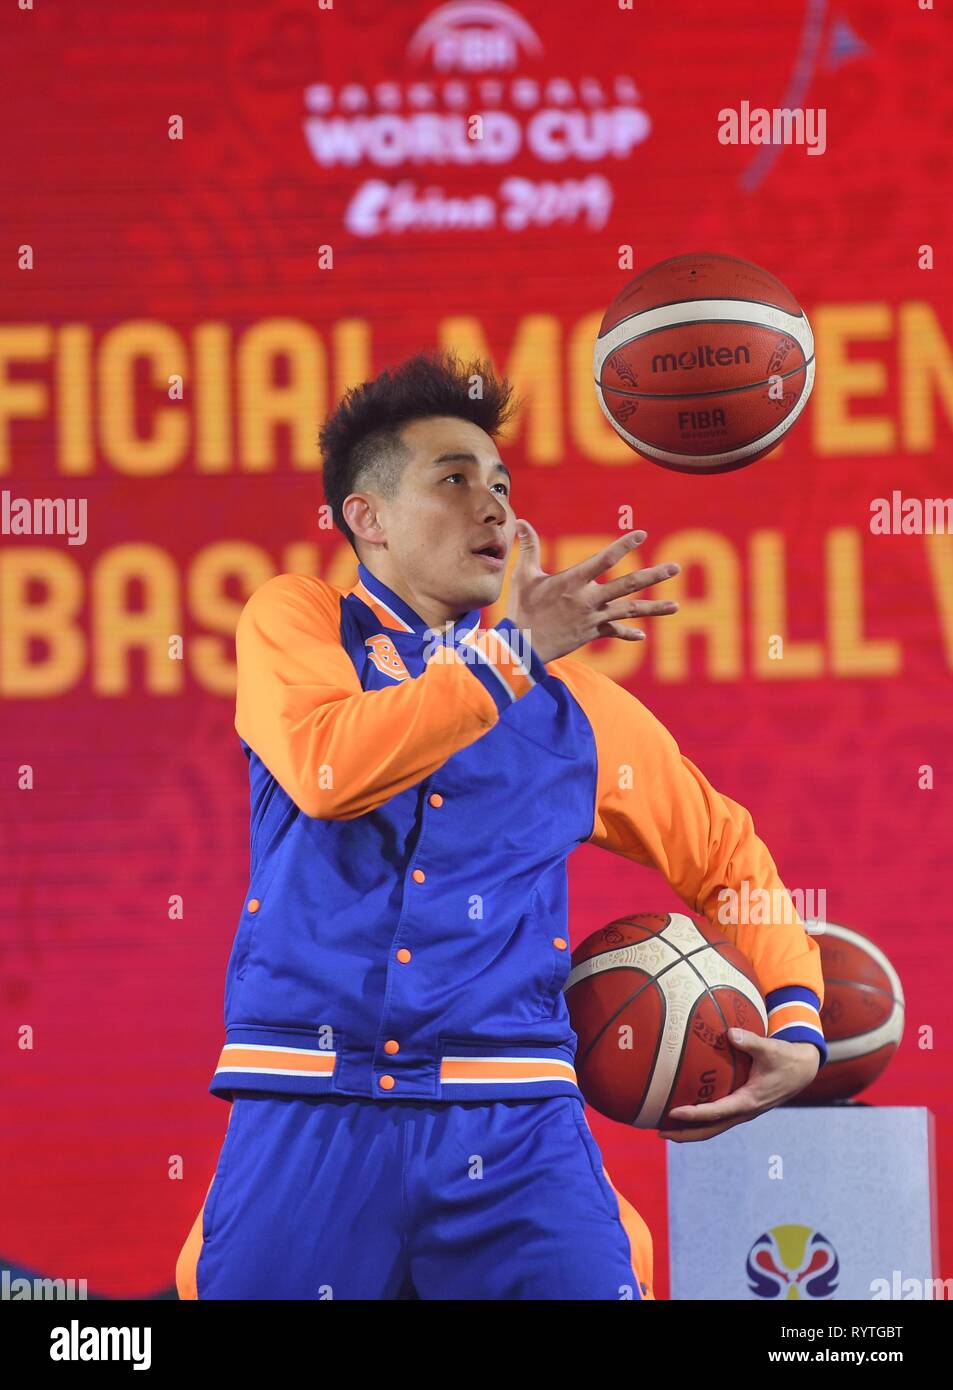 (190315) -- SHENZHEN, March 15, 2019 (Xinhua) -- A performer plays the official ball during the launch event for 2019 FIBA Basketball World Cup official ball in Shenzhen, south China's Guangdong Province, March 15, 2019. (Xinhua/Mao Siqian) Stock Photo